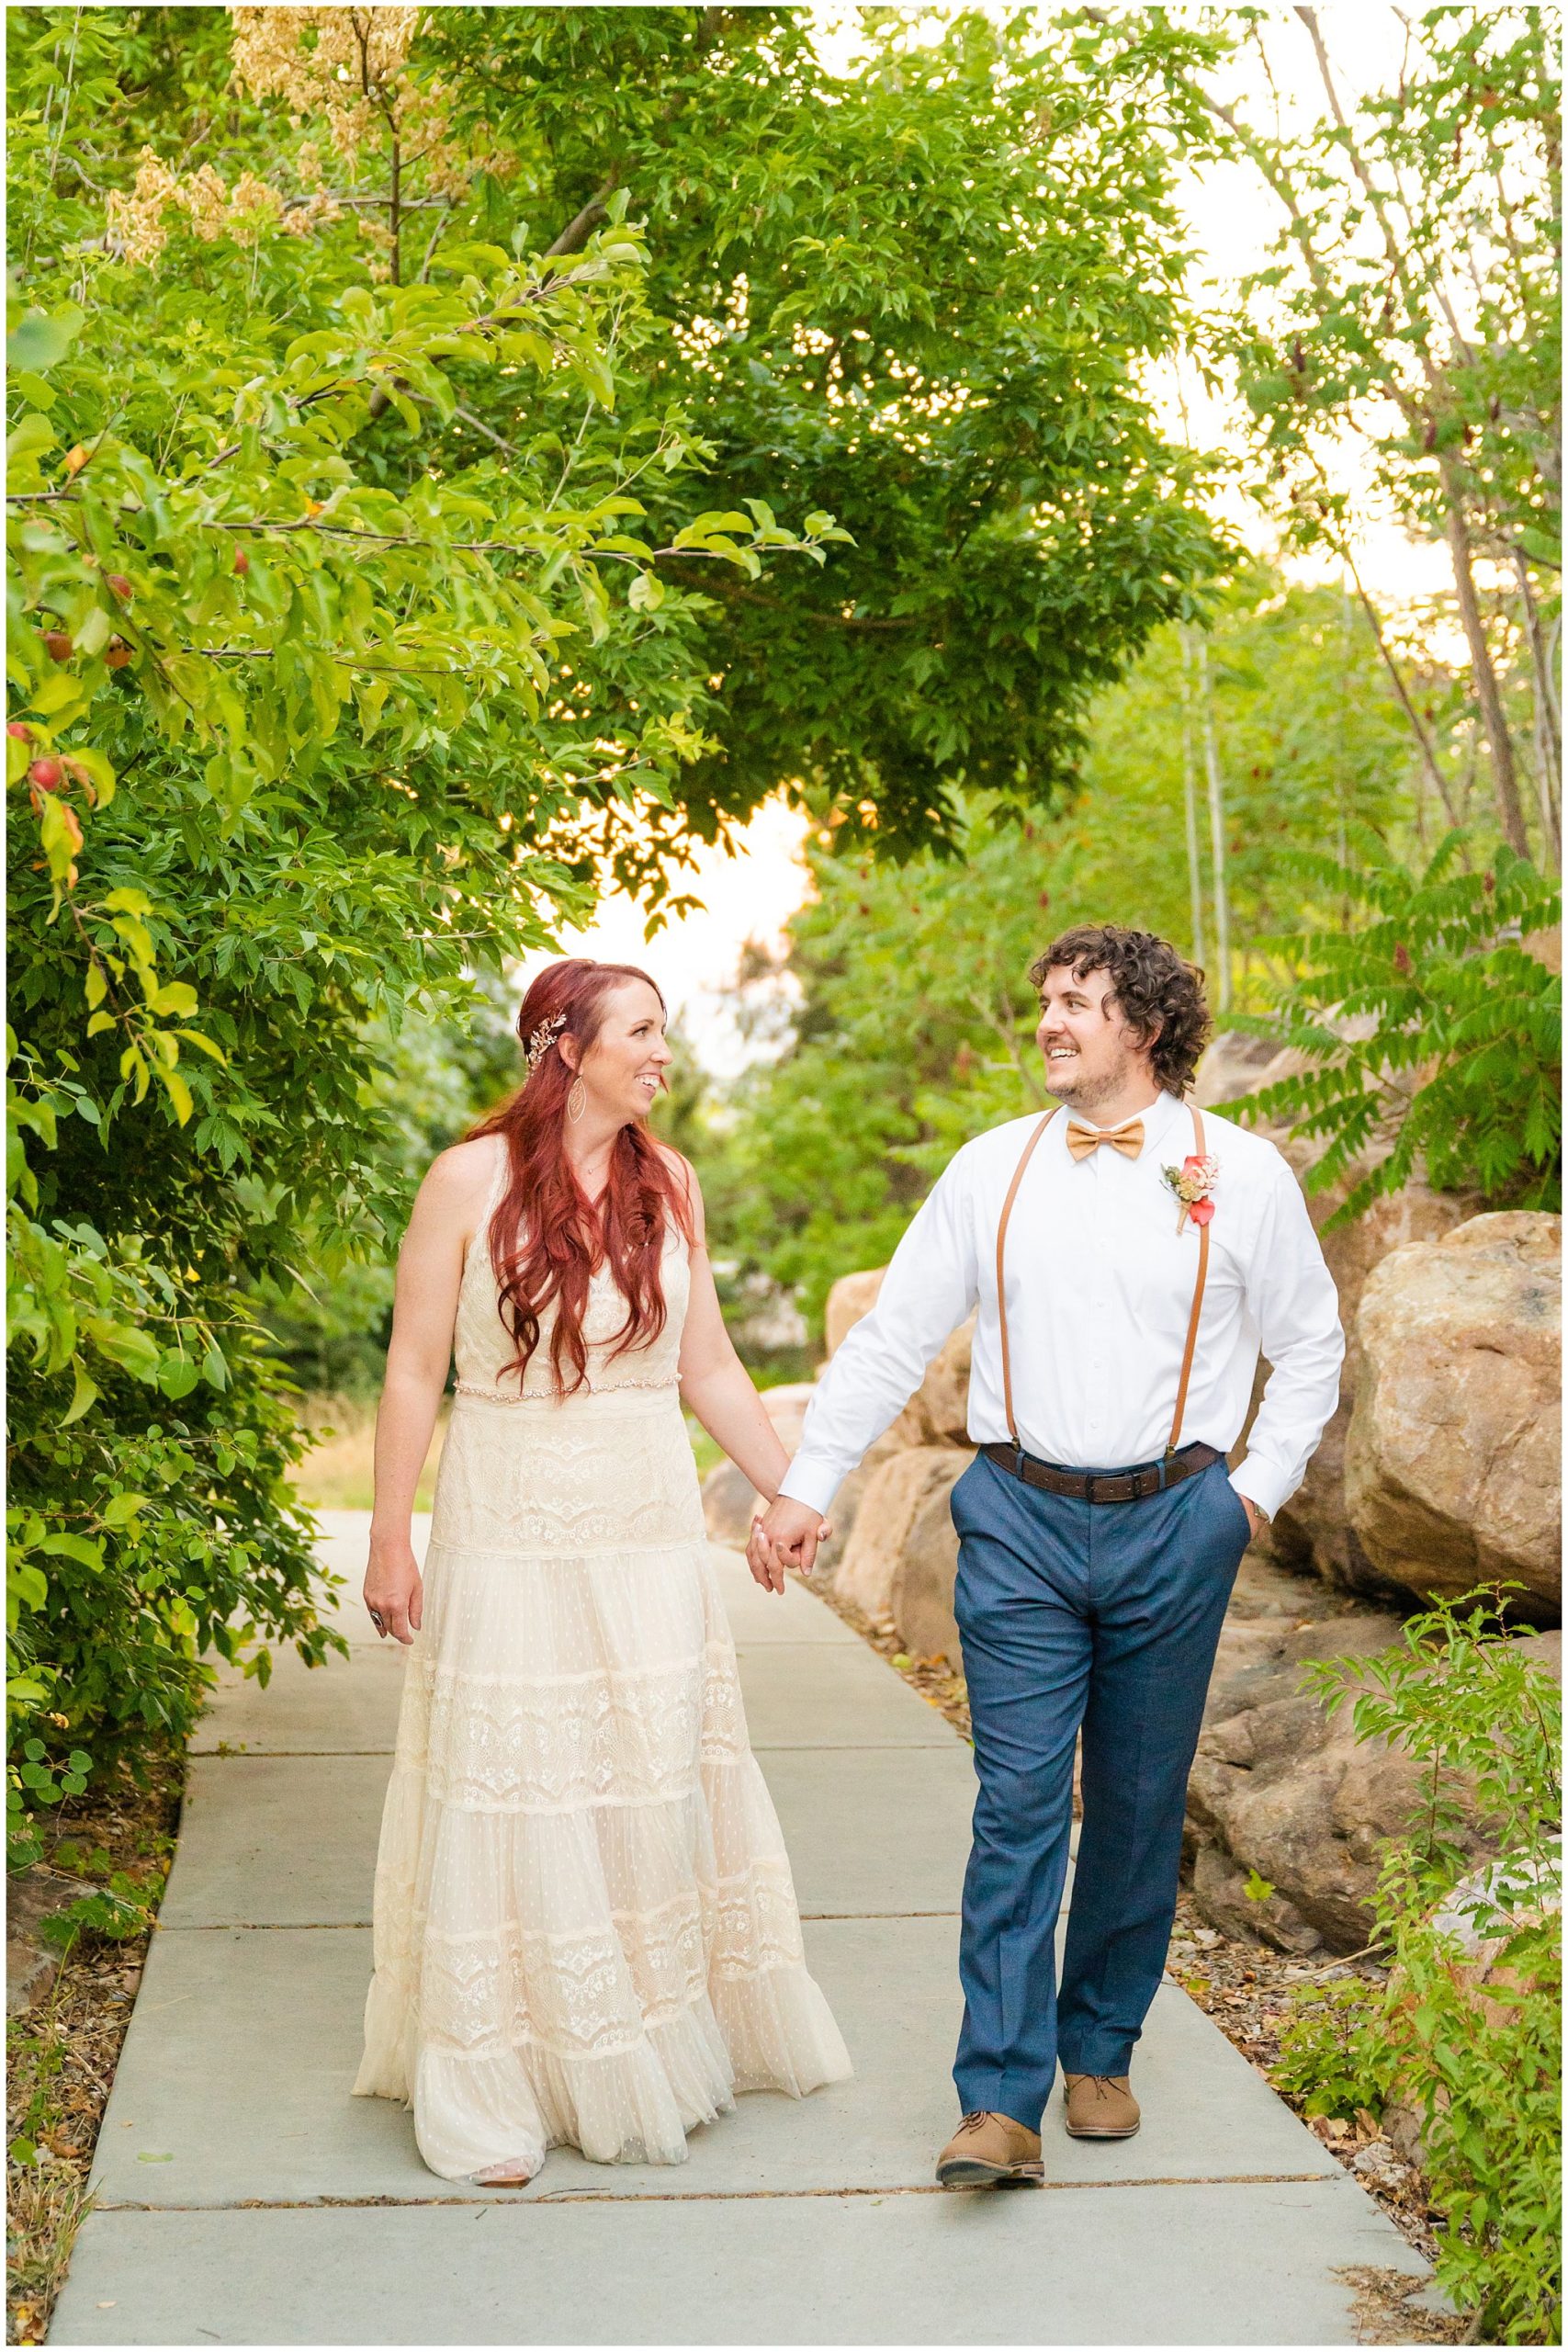 Bride and groom portraits in boho lace dress and suspenders and bowtie at Lions Park in Cache Valley | Logan Utah Outdoor Summer Wedding | Jessie and Dallin Photography